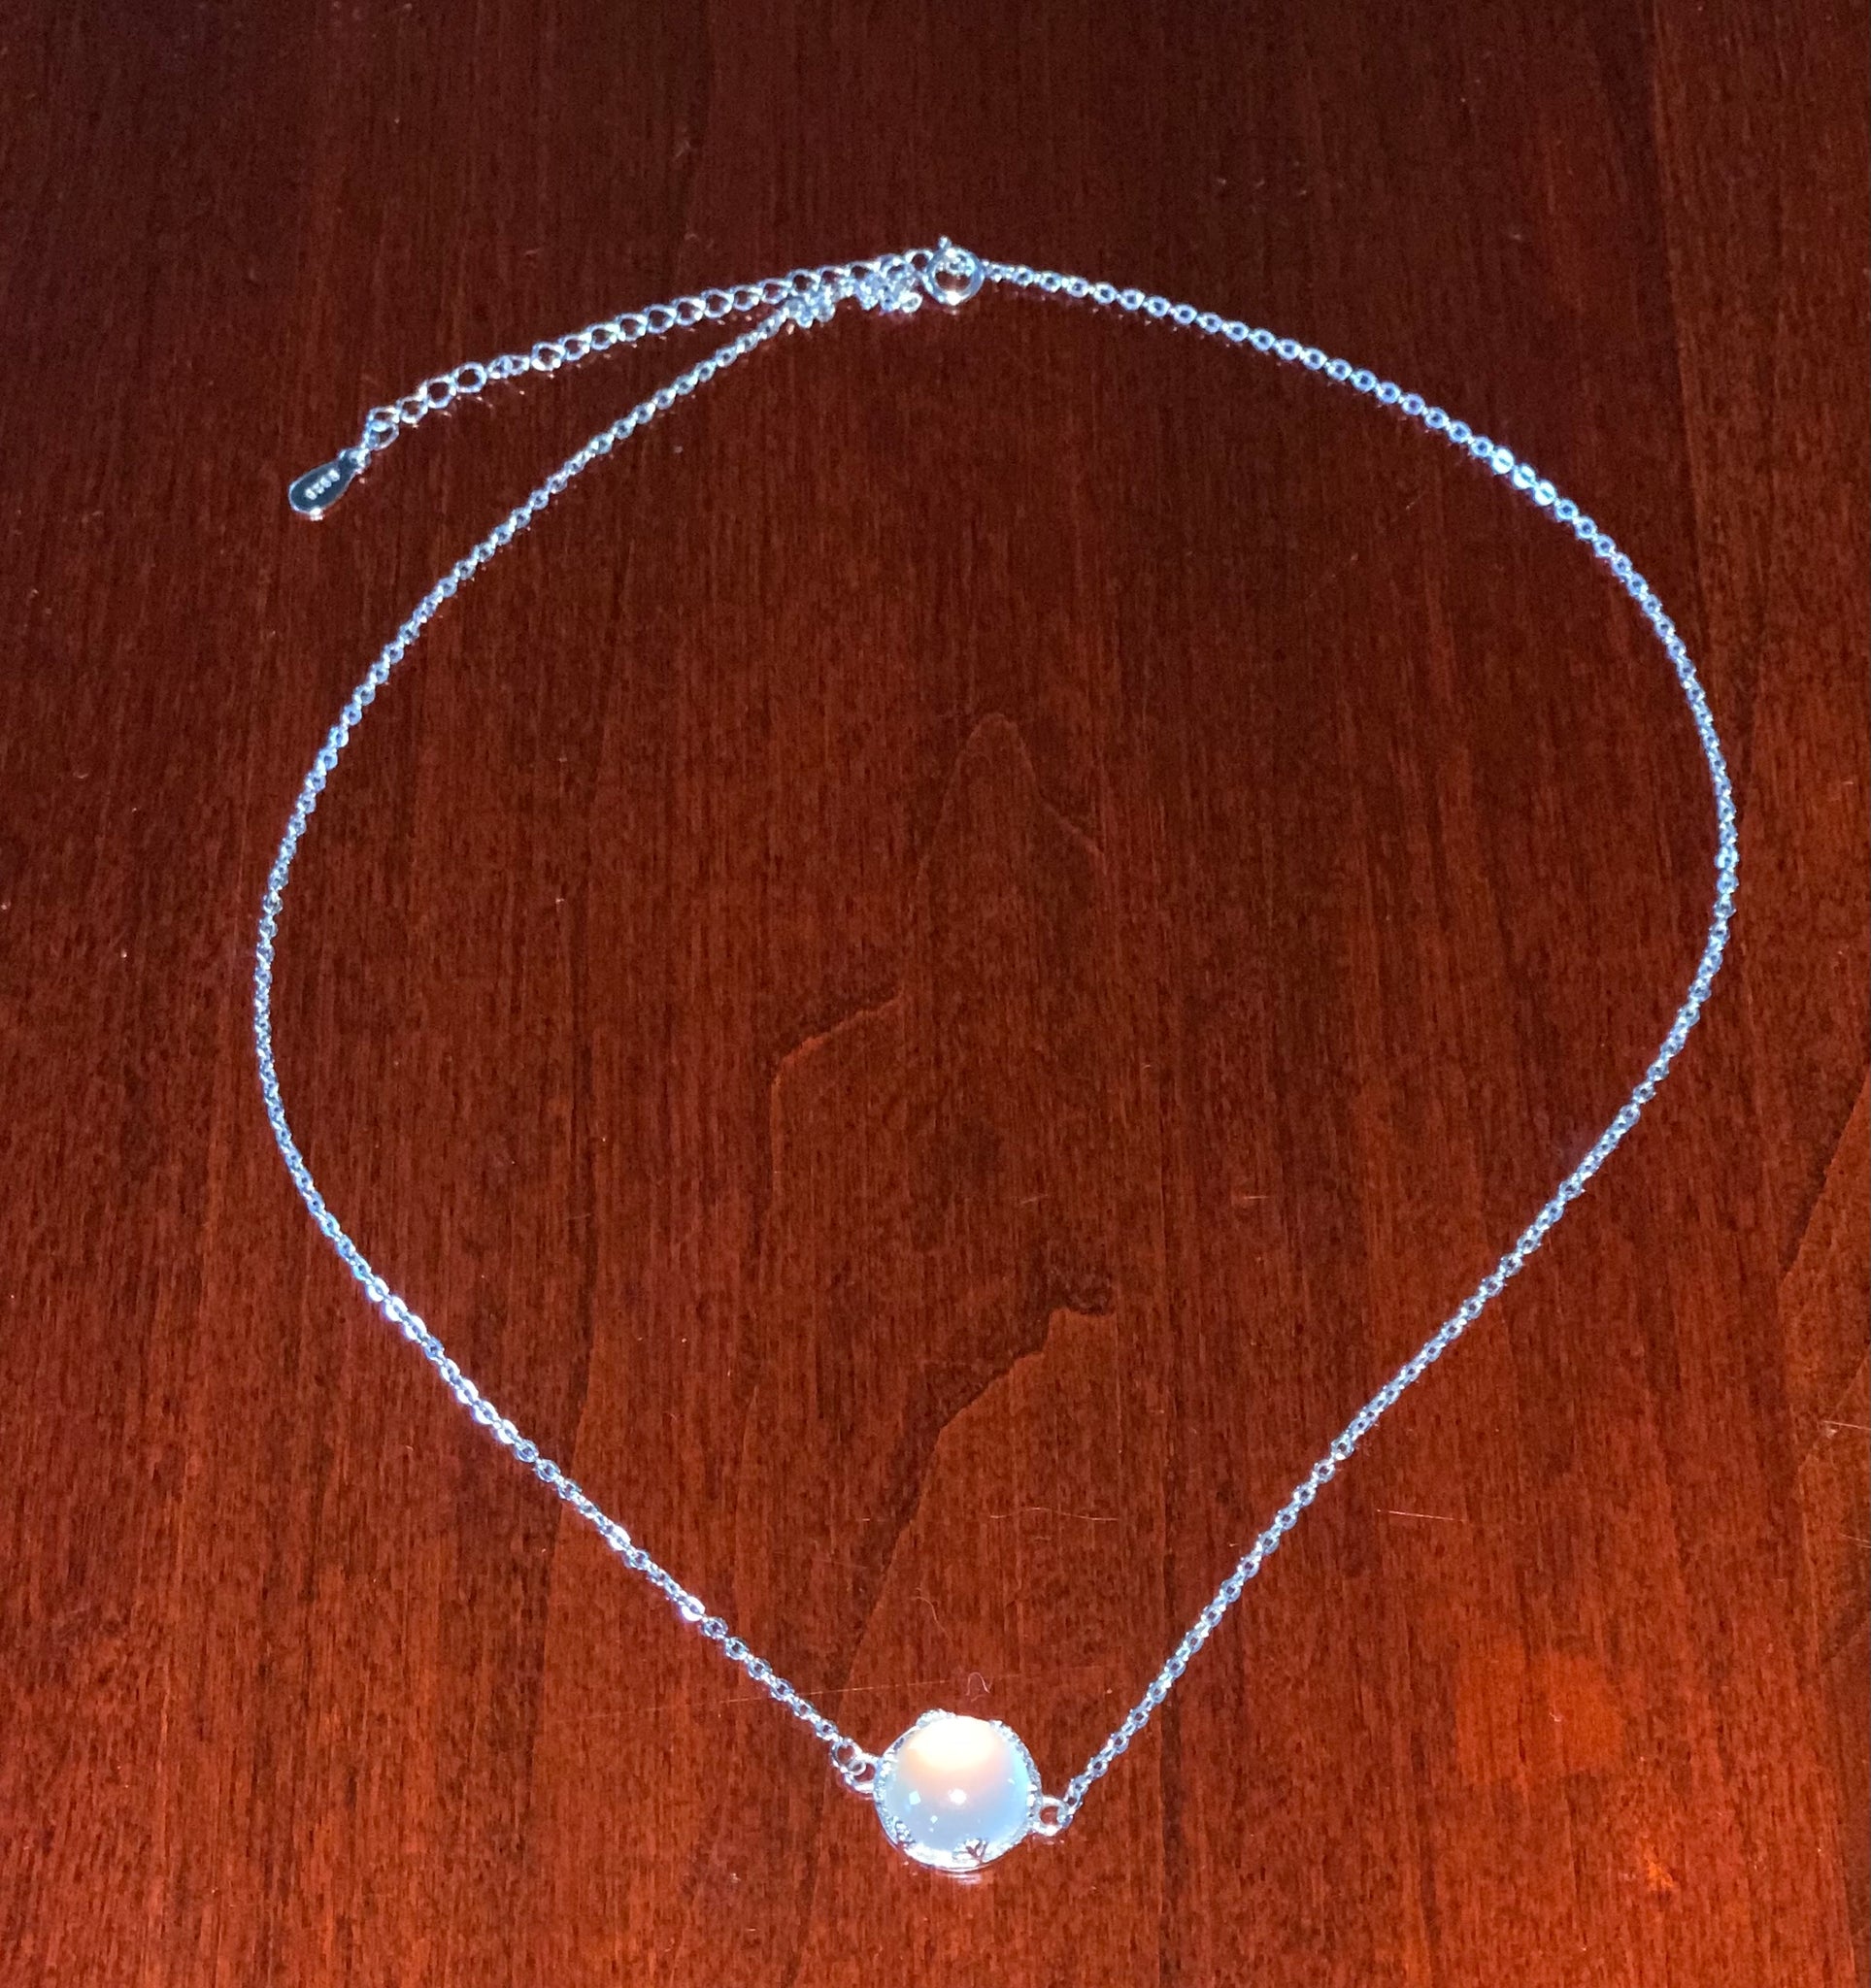 Two Moonstone Necklace